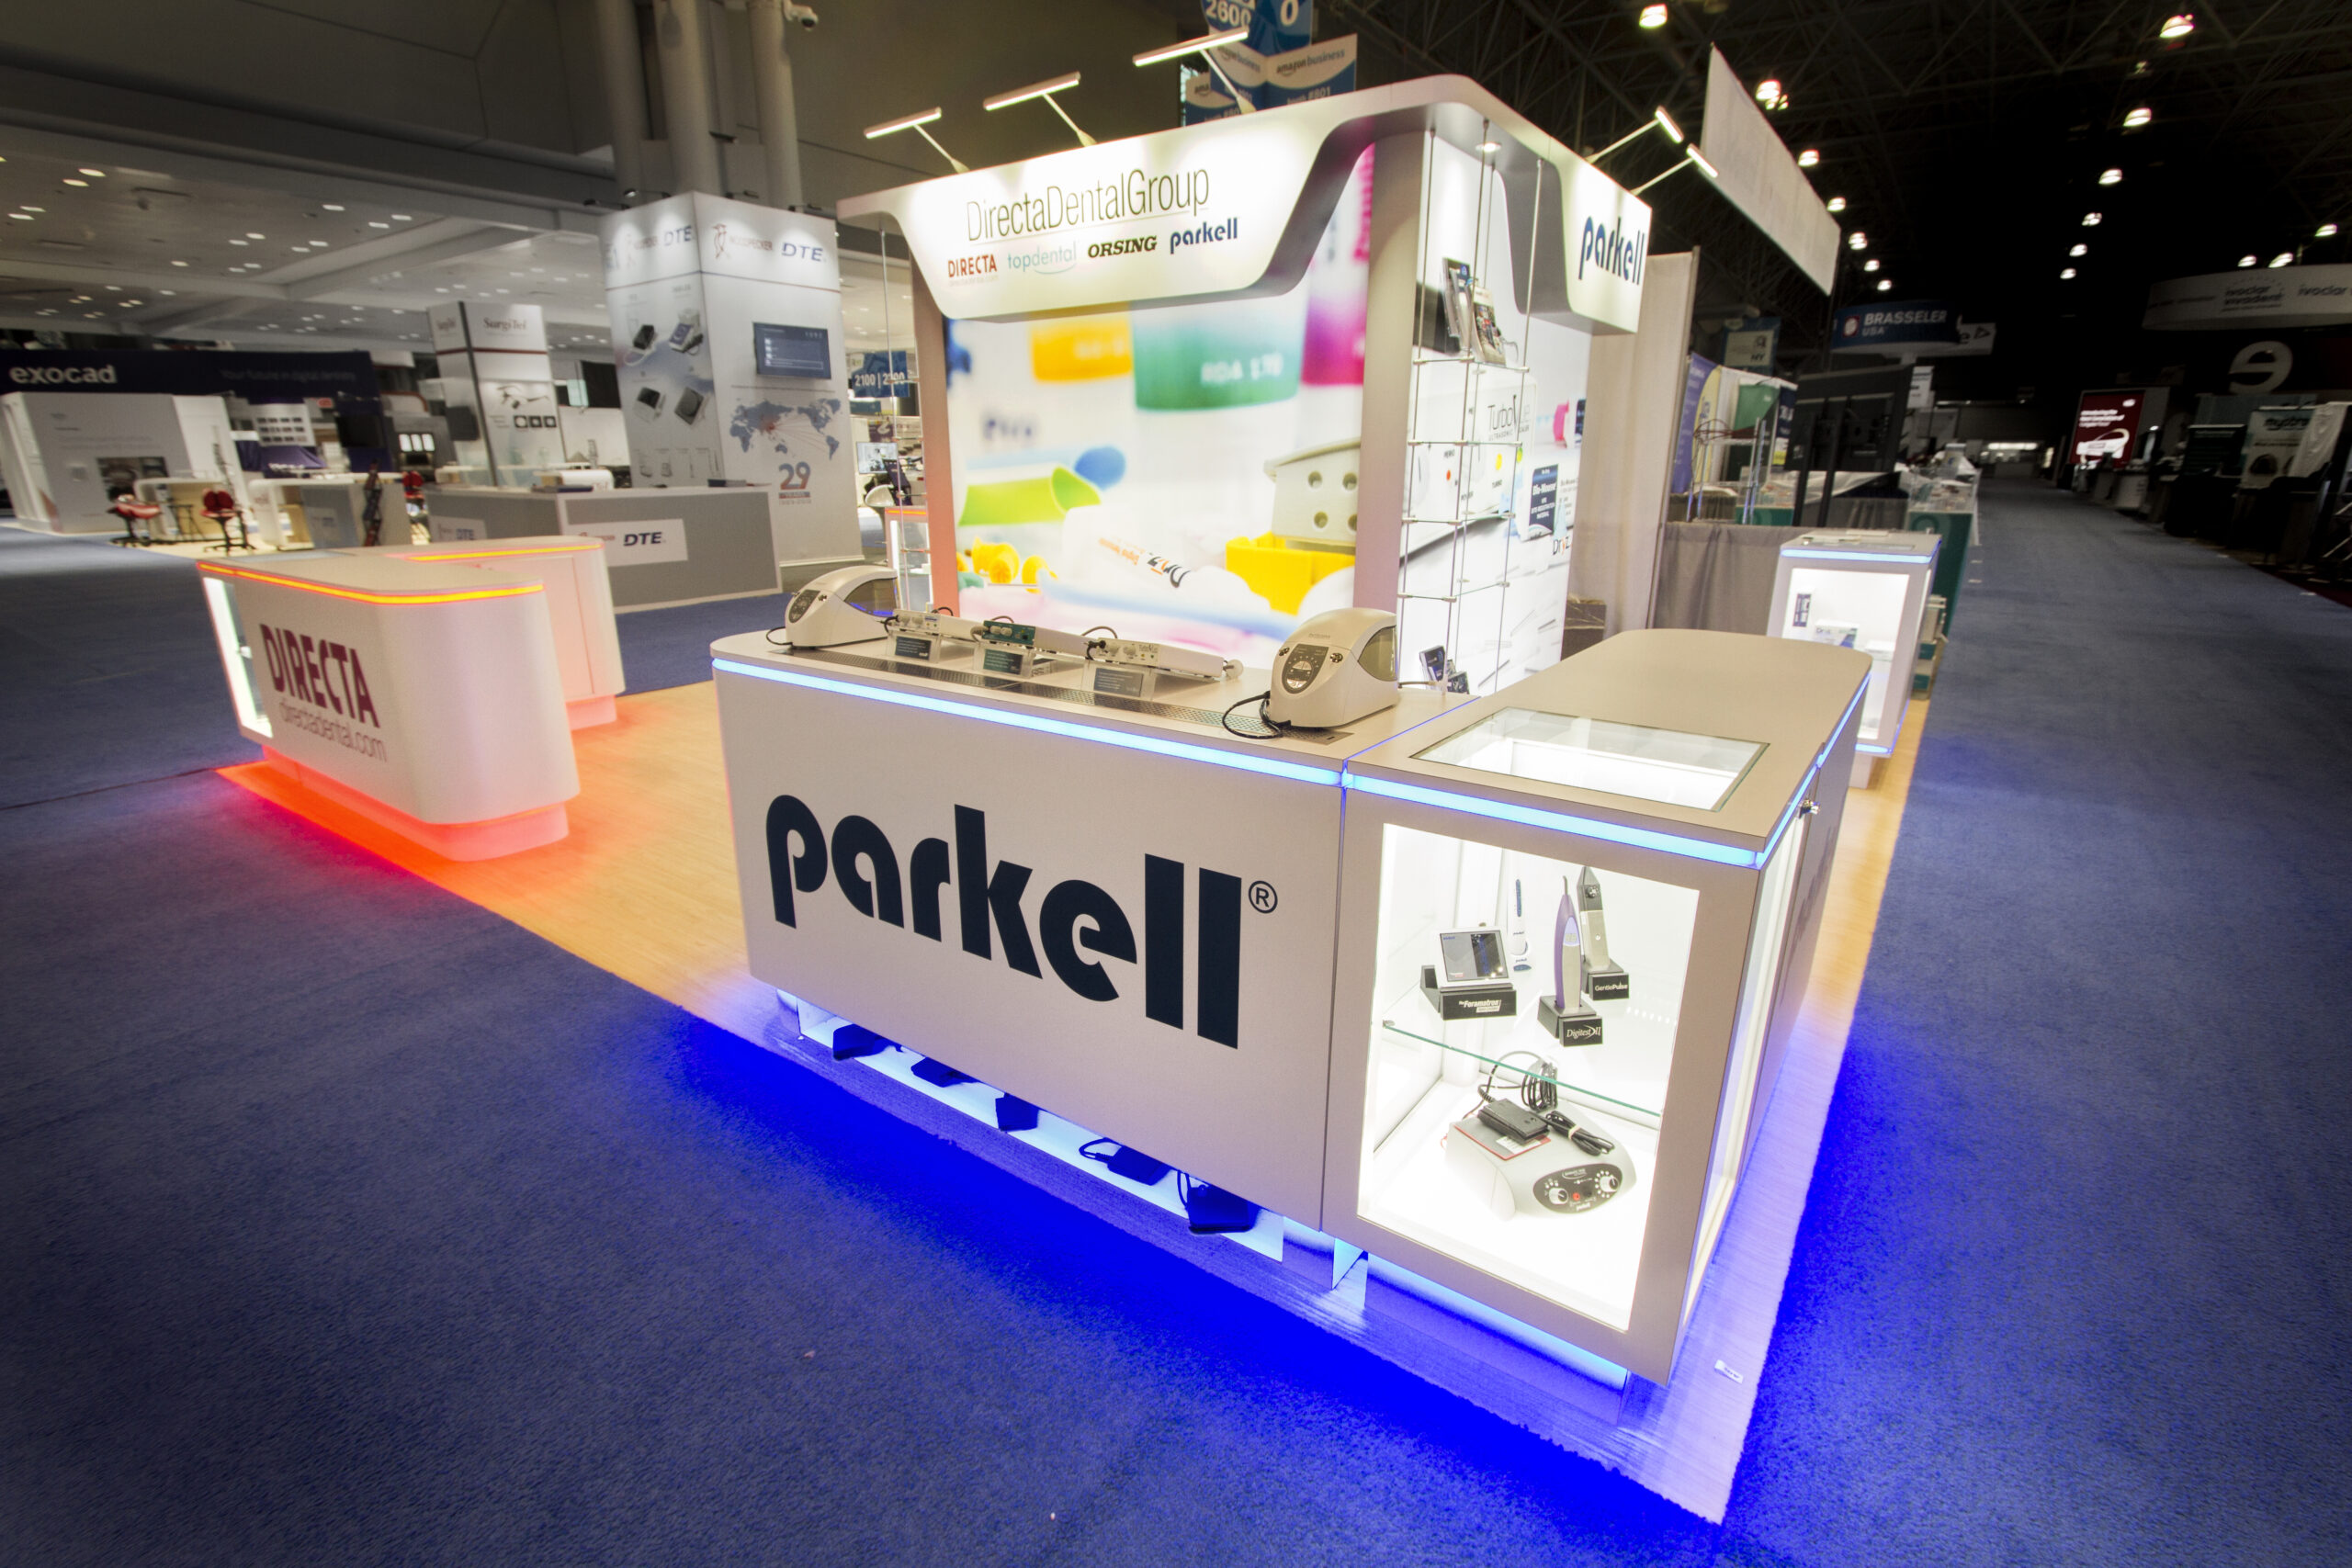 Product View of Parkell's Island Exhibit at the Greater NY Dental Show